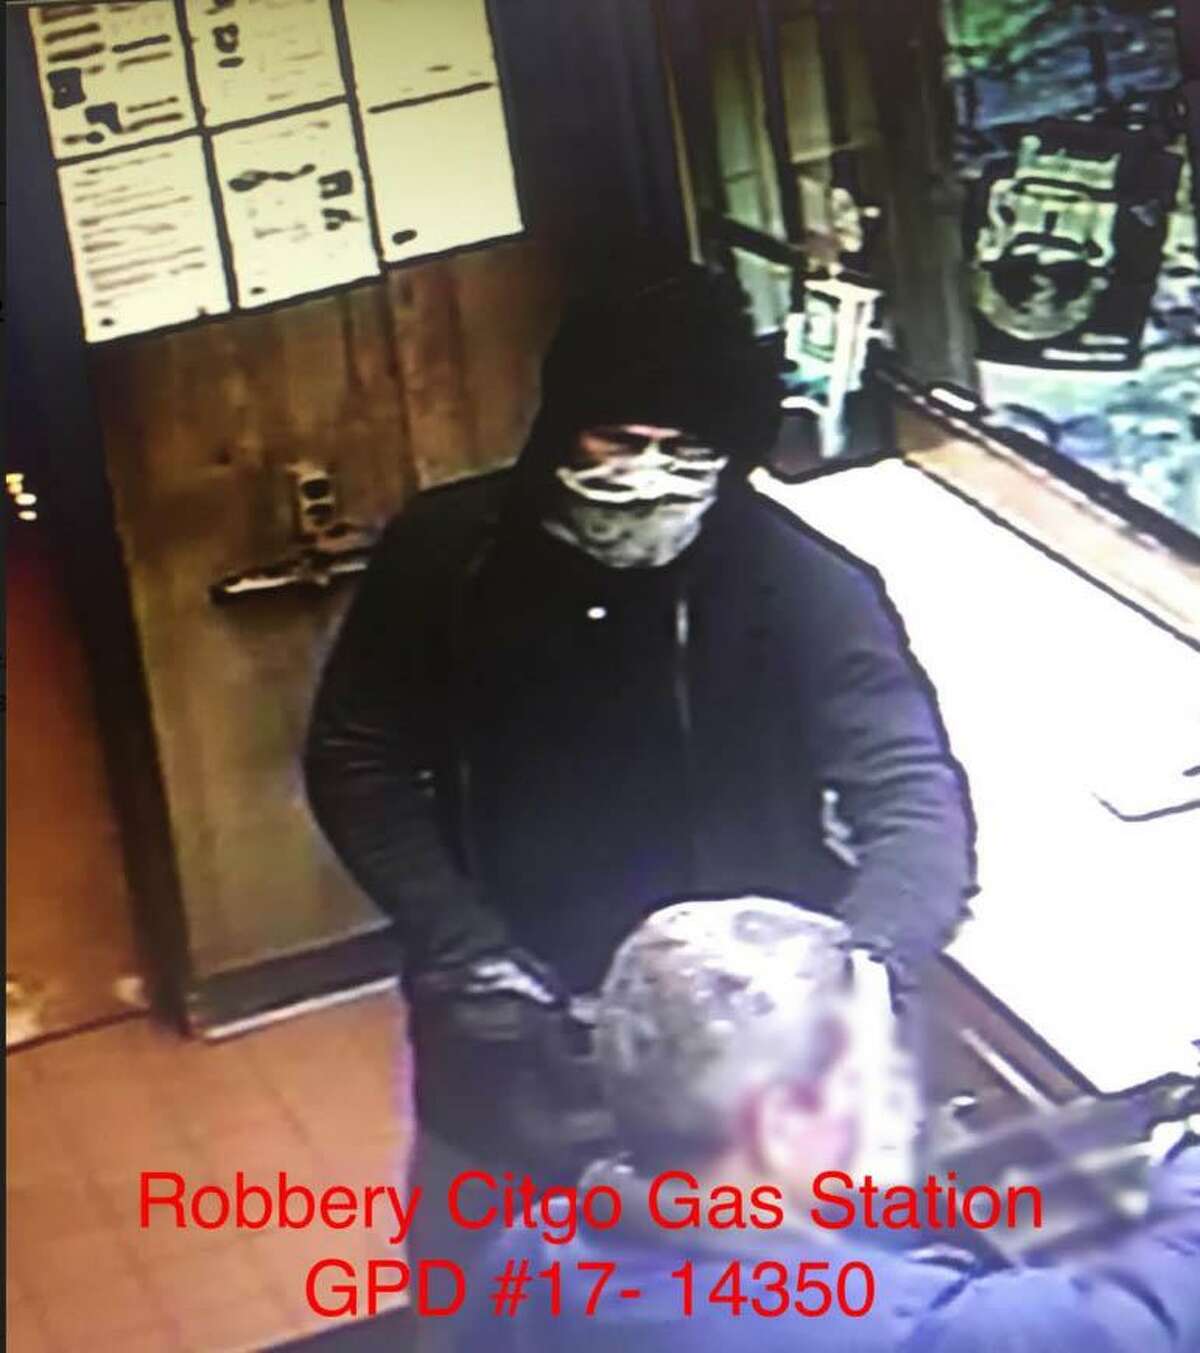 The suspect wanted in a gas-station robbery in Cos Cob Monday night was armed with a handgun.